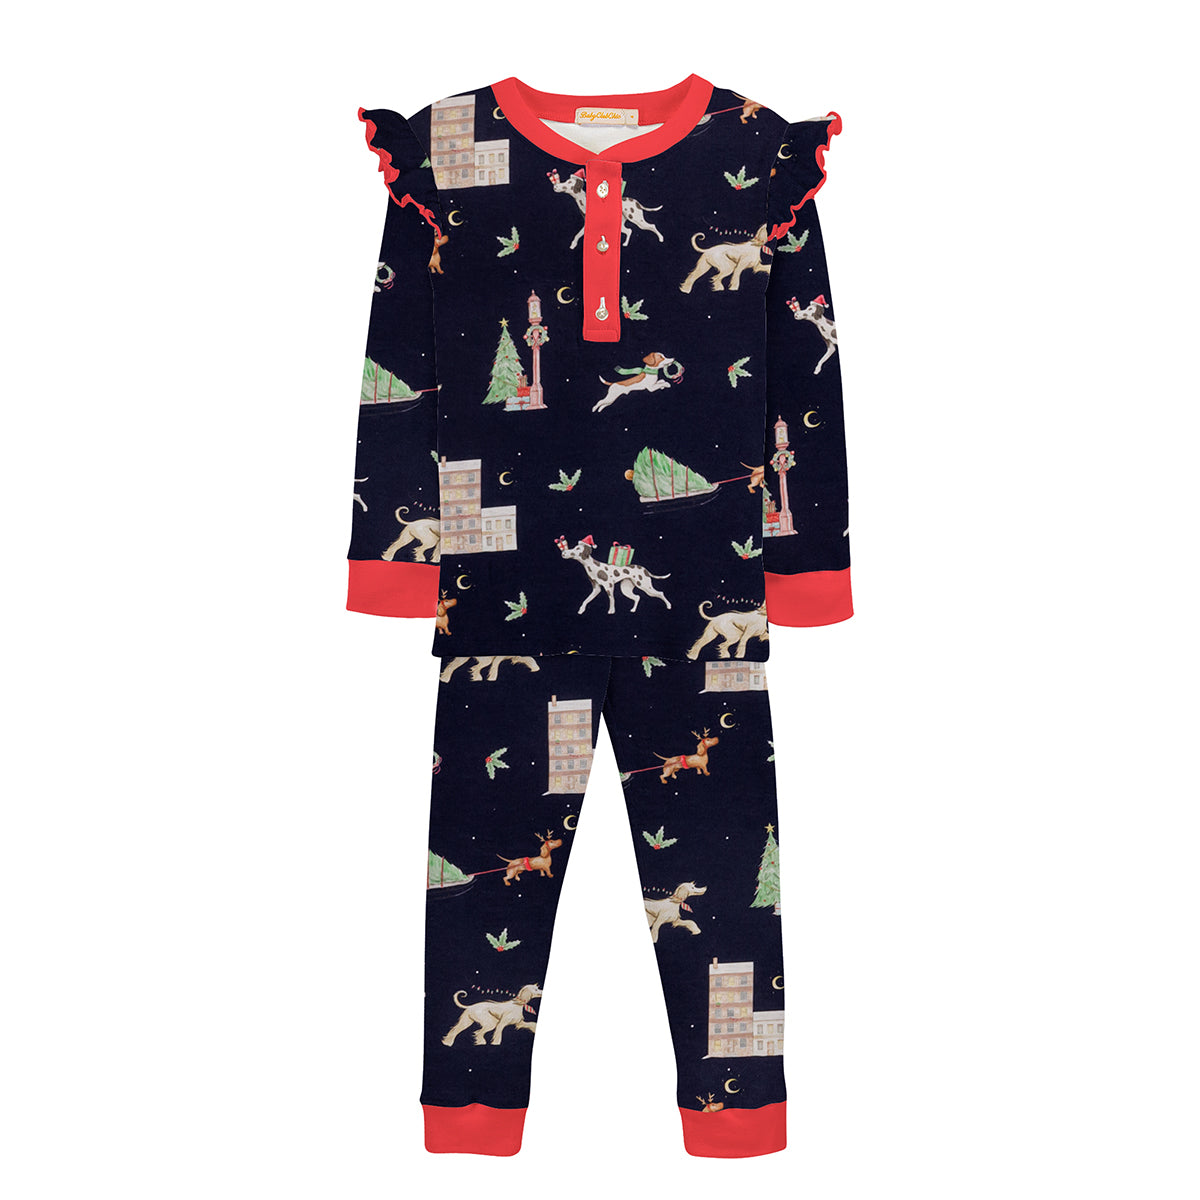 Baby Club Chic Holiday In The City Toddler Girl's Christmas Pajamas